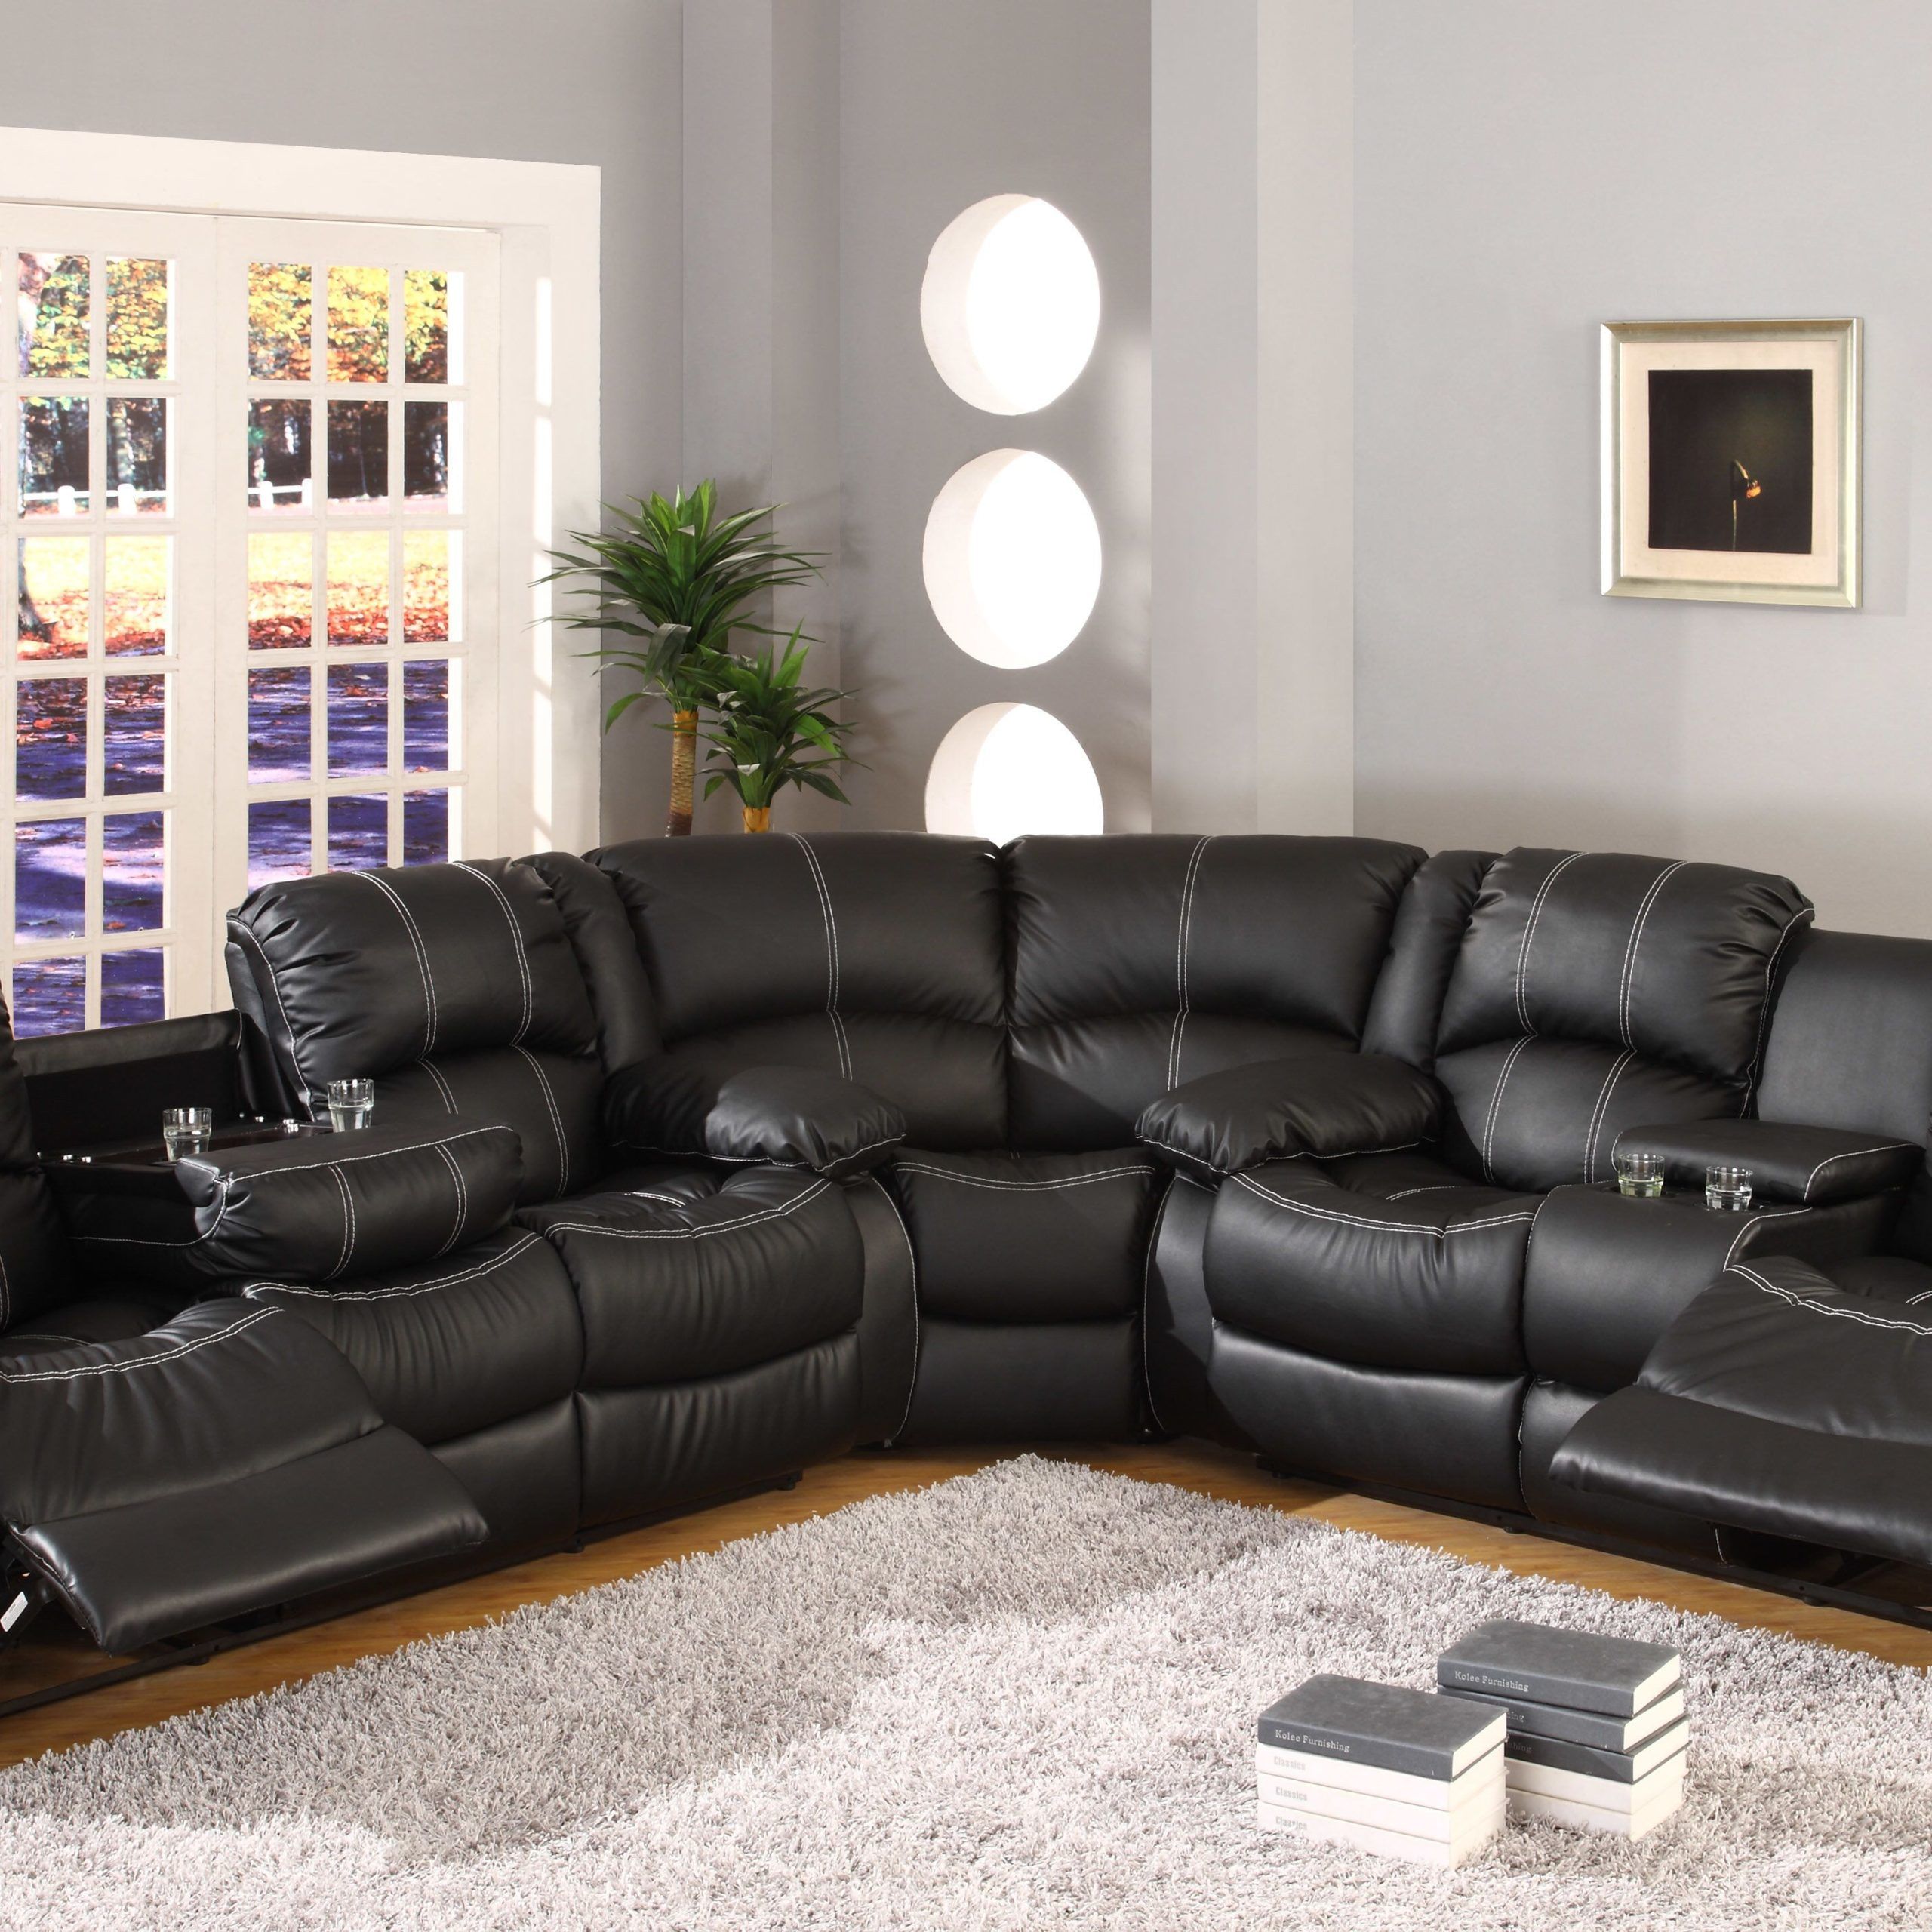 Hattie Comfort Reclining Sectional | Sectional Sofa With Recliner With Regard To Right Facing Black Sofas (Gallery 5 of 20)